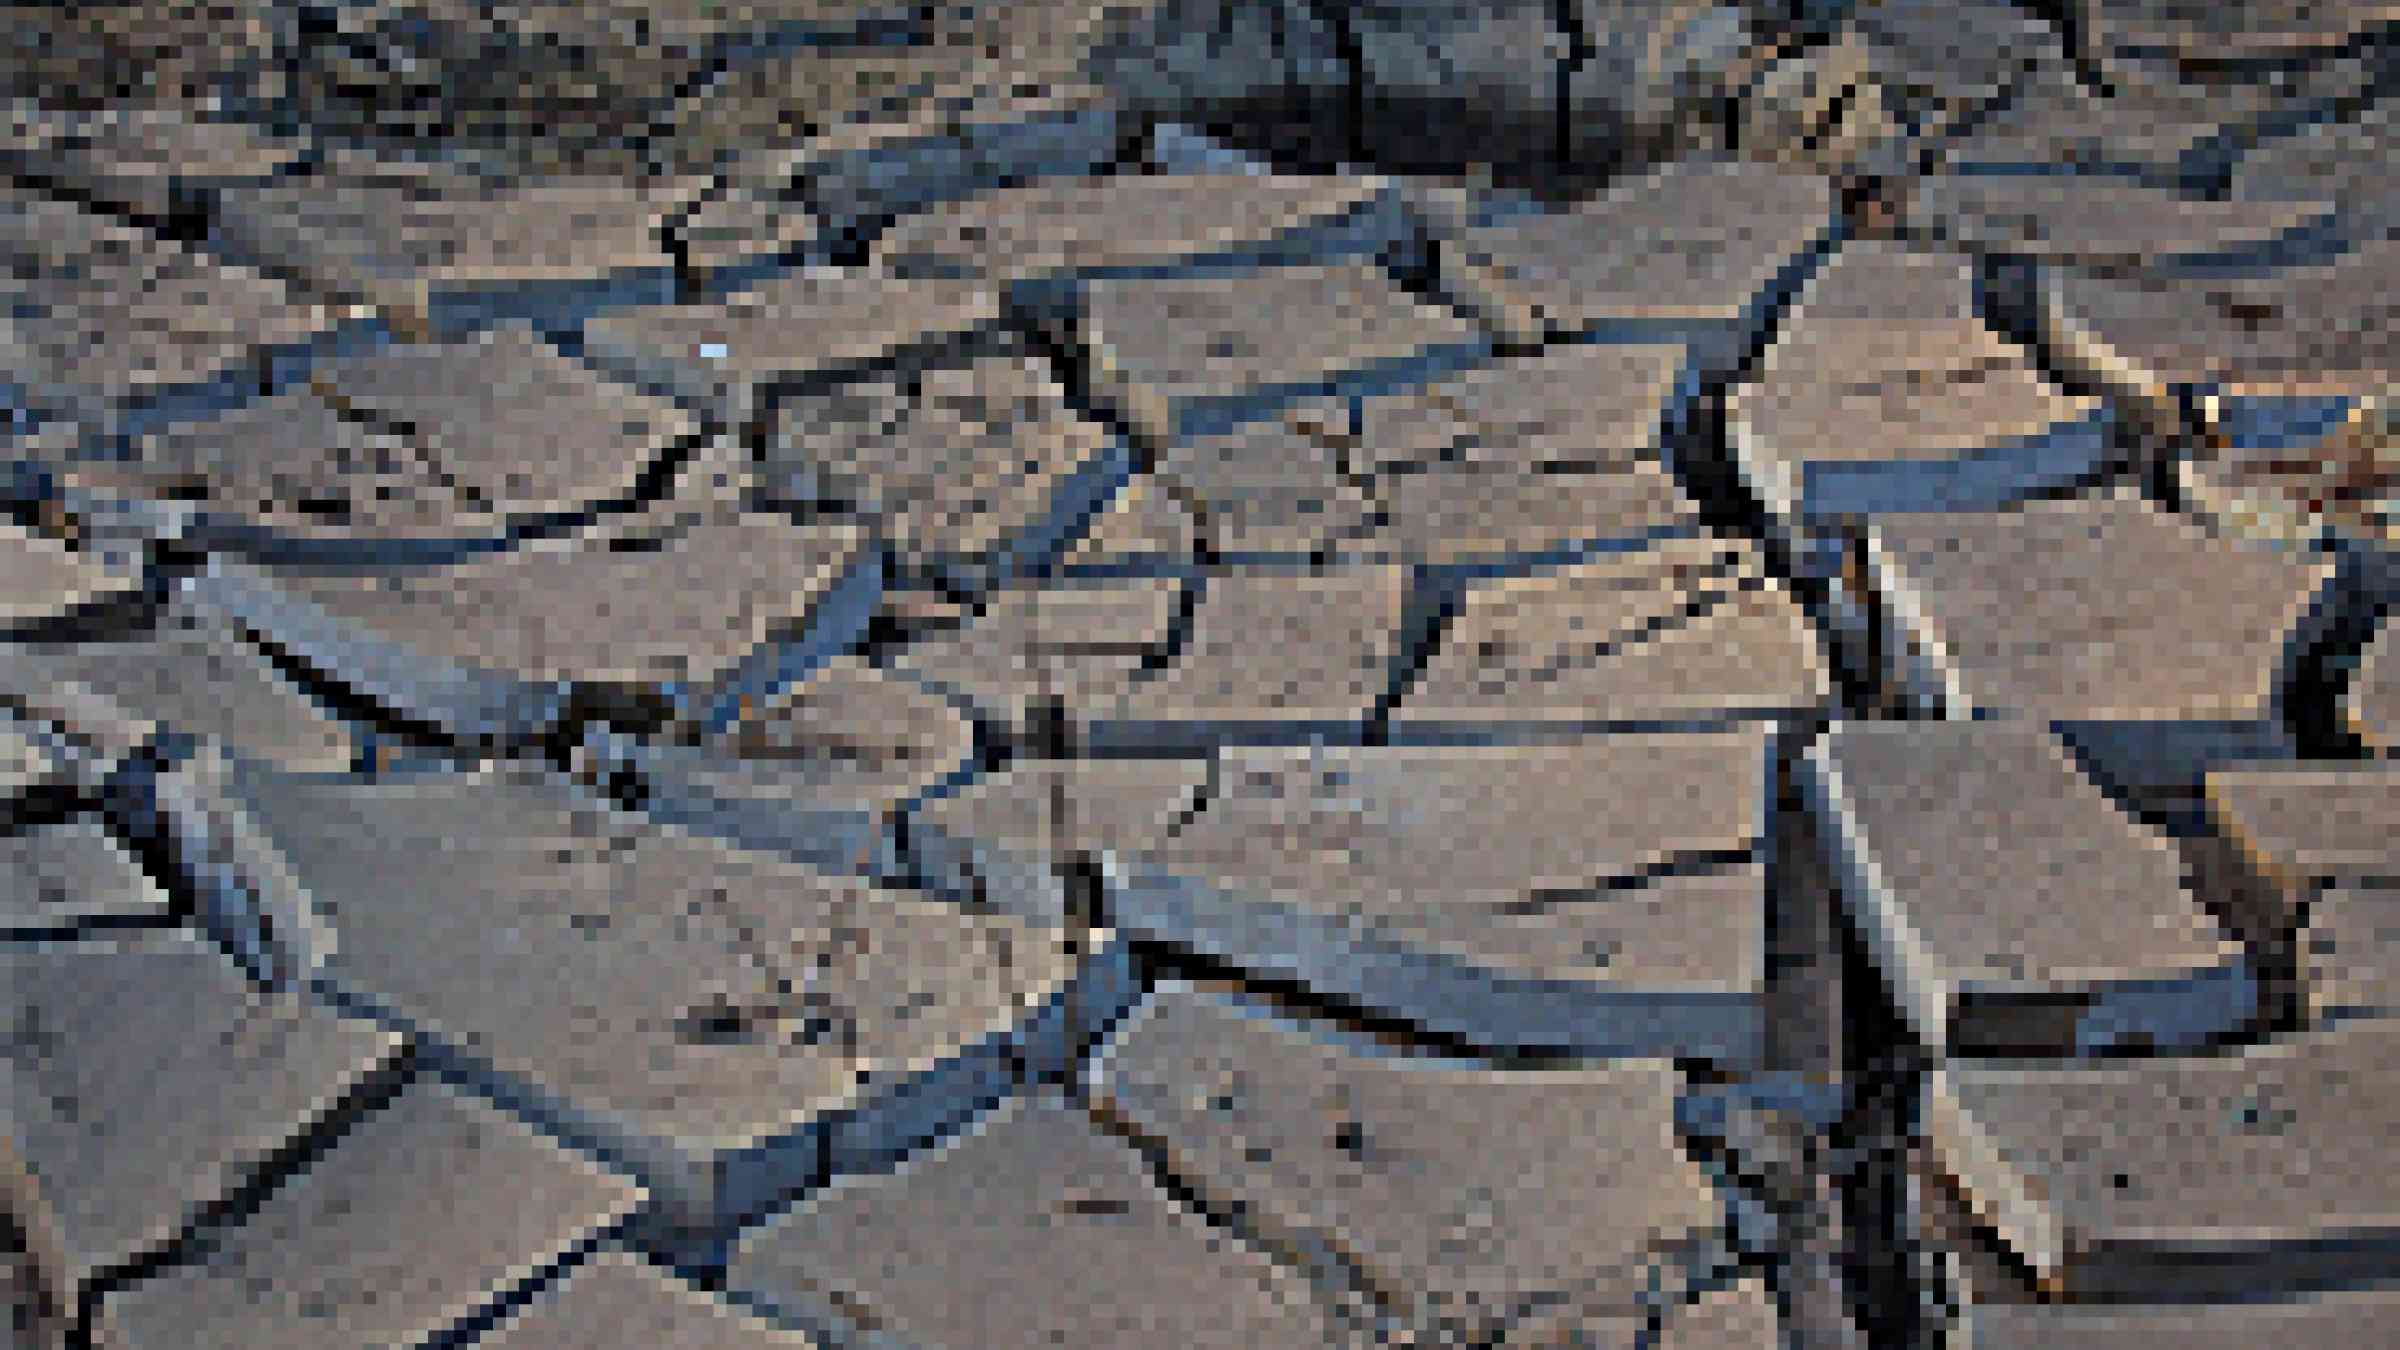 Photo of a dry river bed in Kenya, by Flickr user Matt and Kim Rudge, Creative Commons Attribution 2.0 Generic